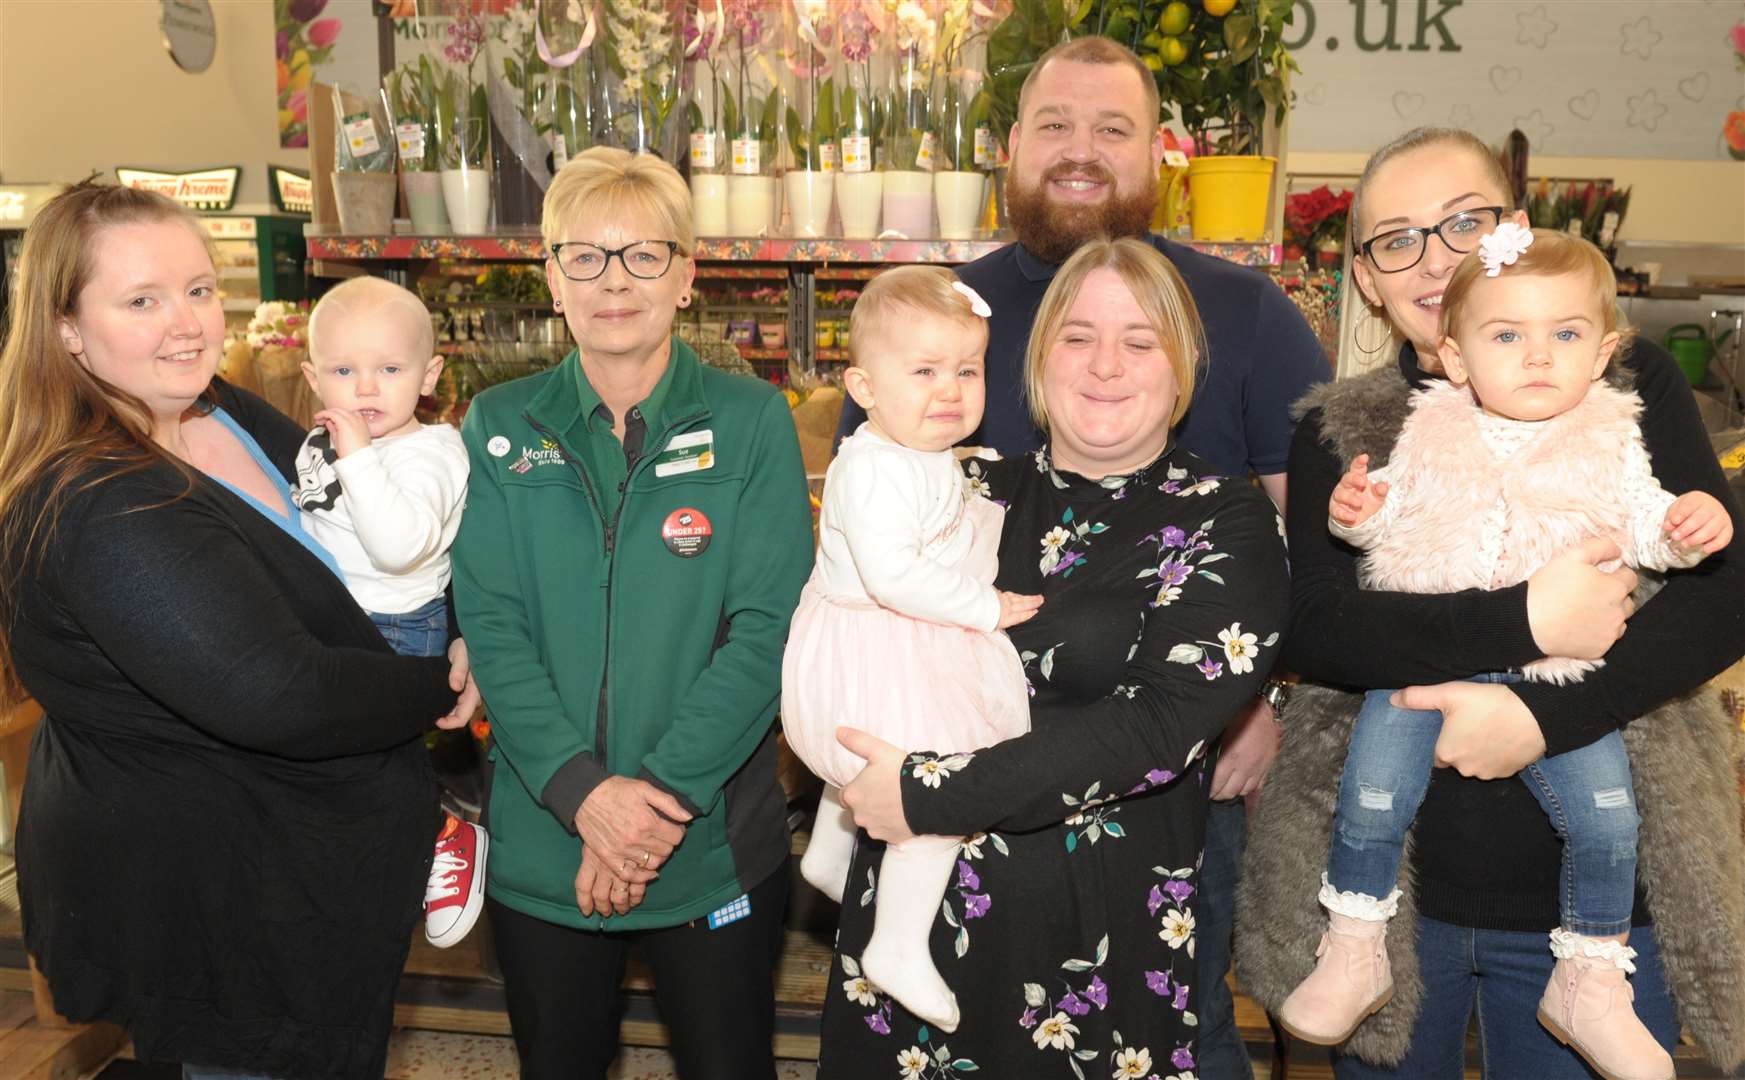 Last year's Cute Kids winners, their mums and Morrisons staff. Picture: Steve Crispe 5639501